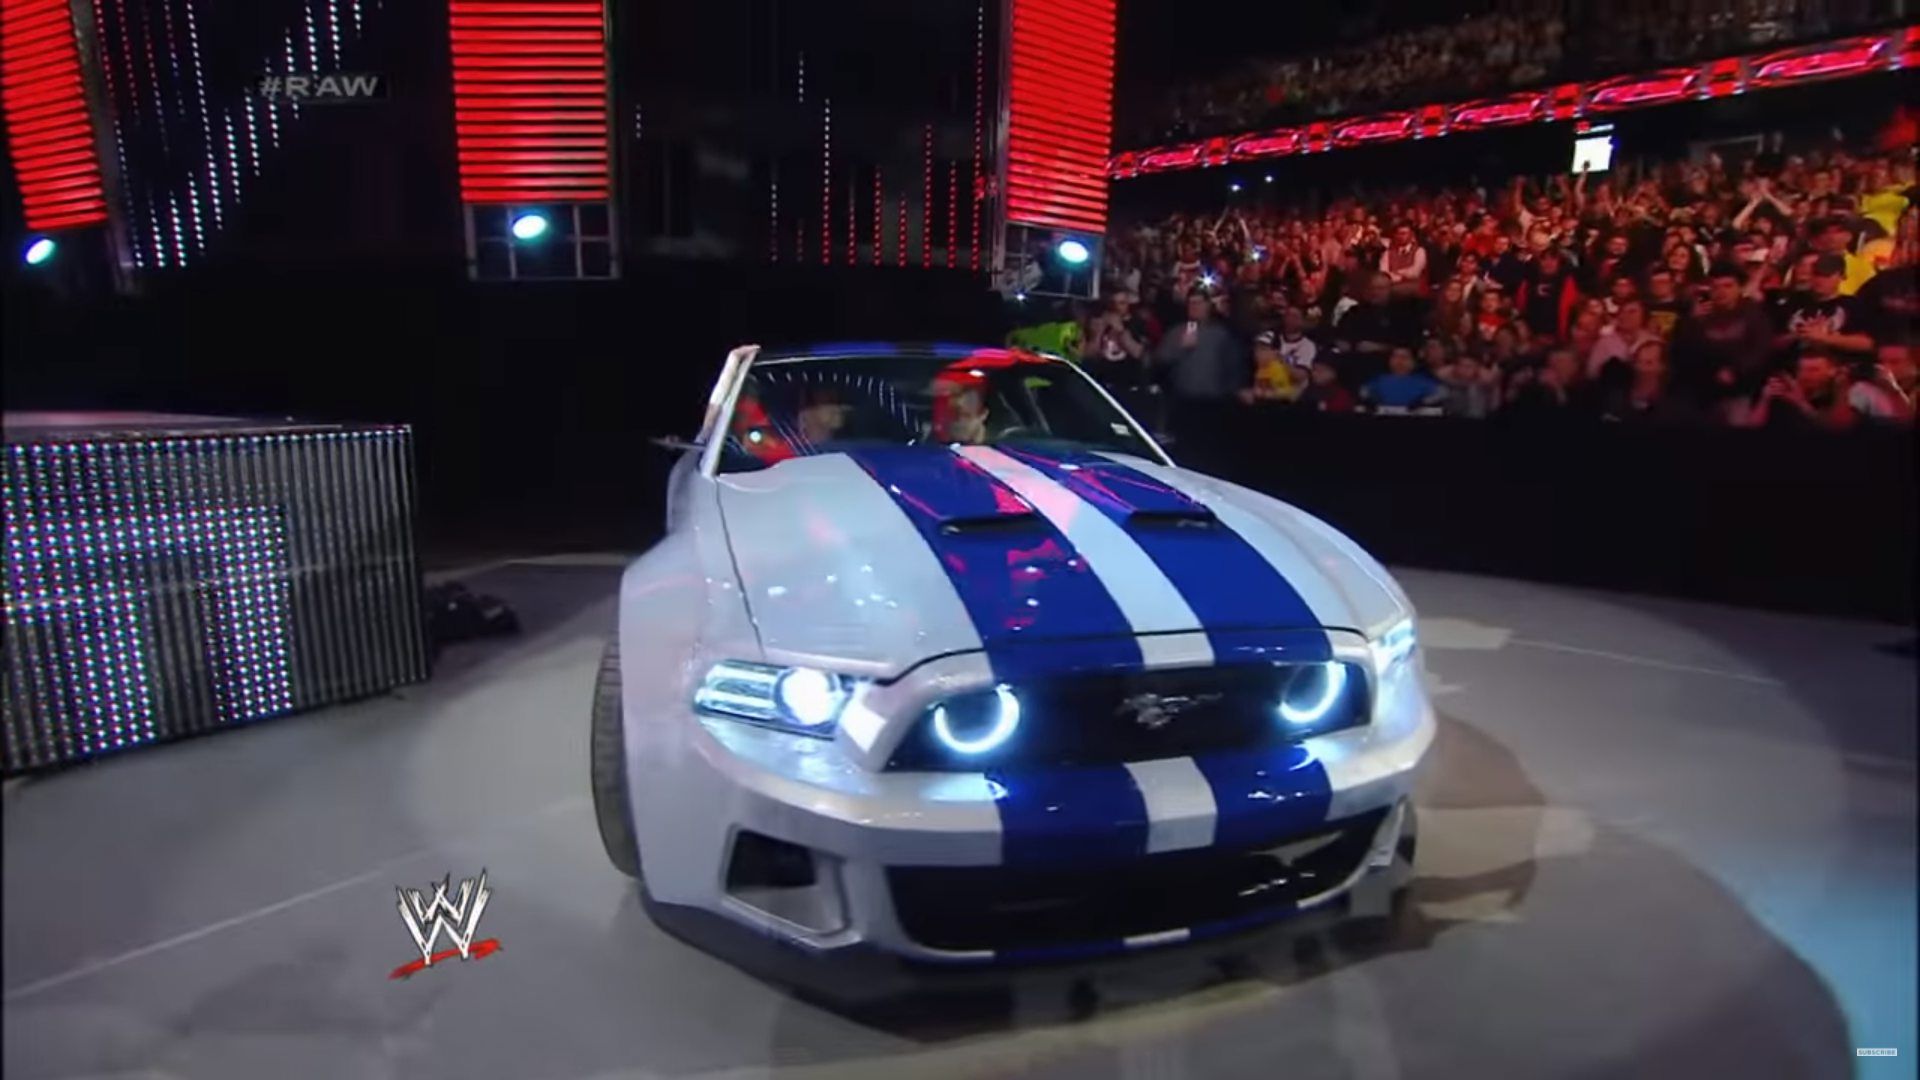 Aaron Paul in his Need For Speed Mustang Shelby in WWE Raw